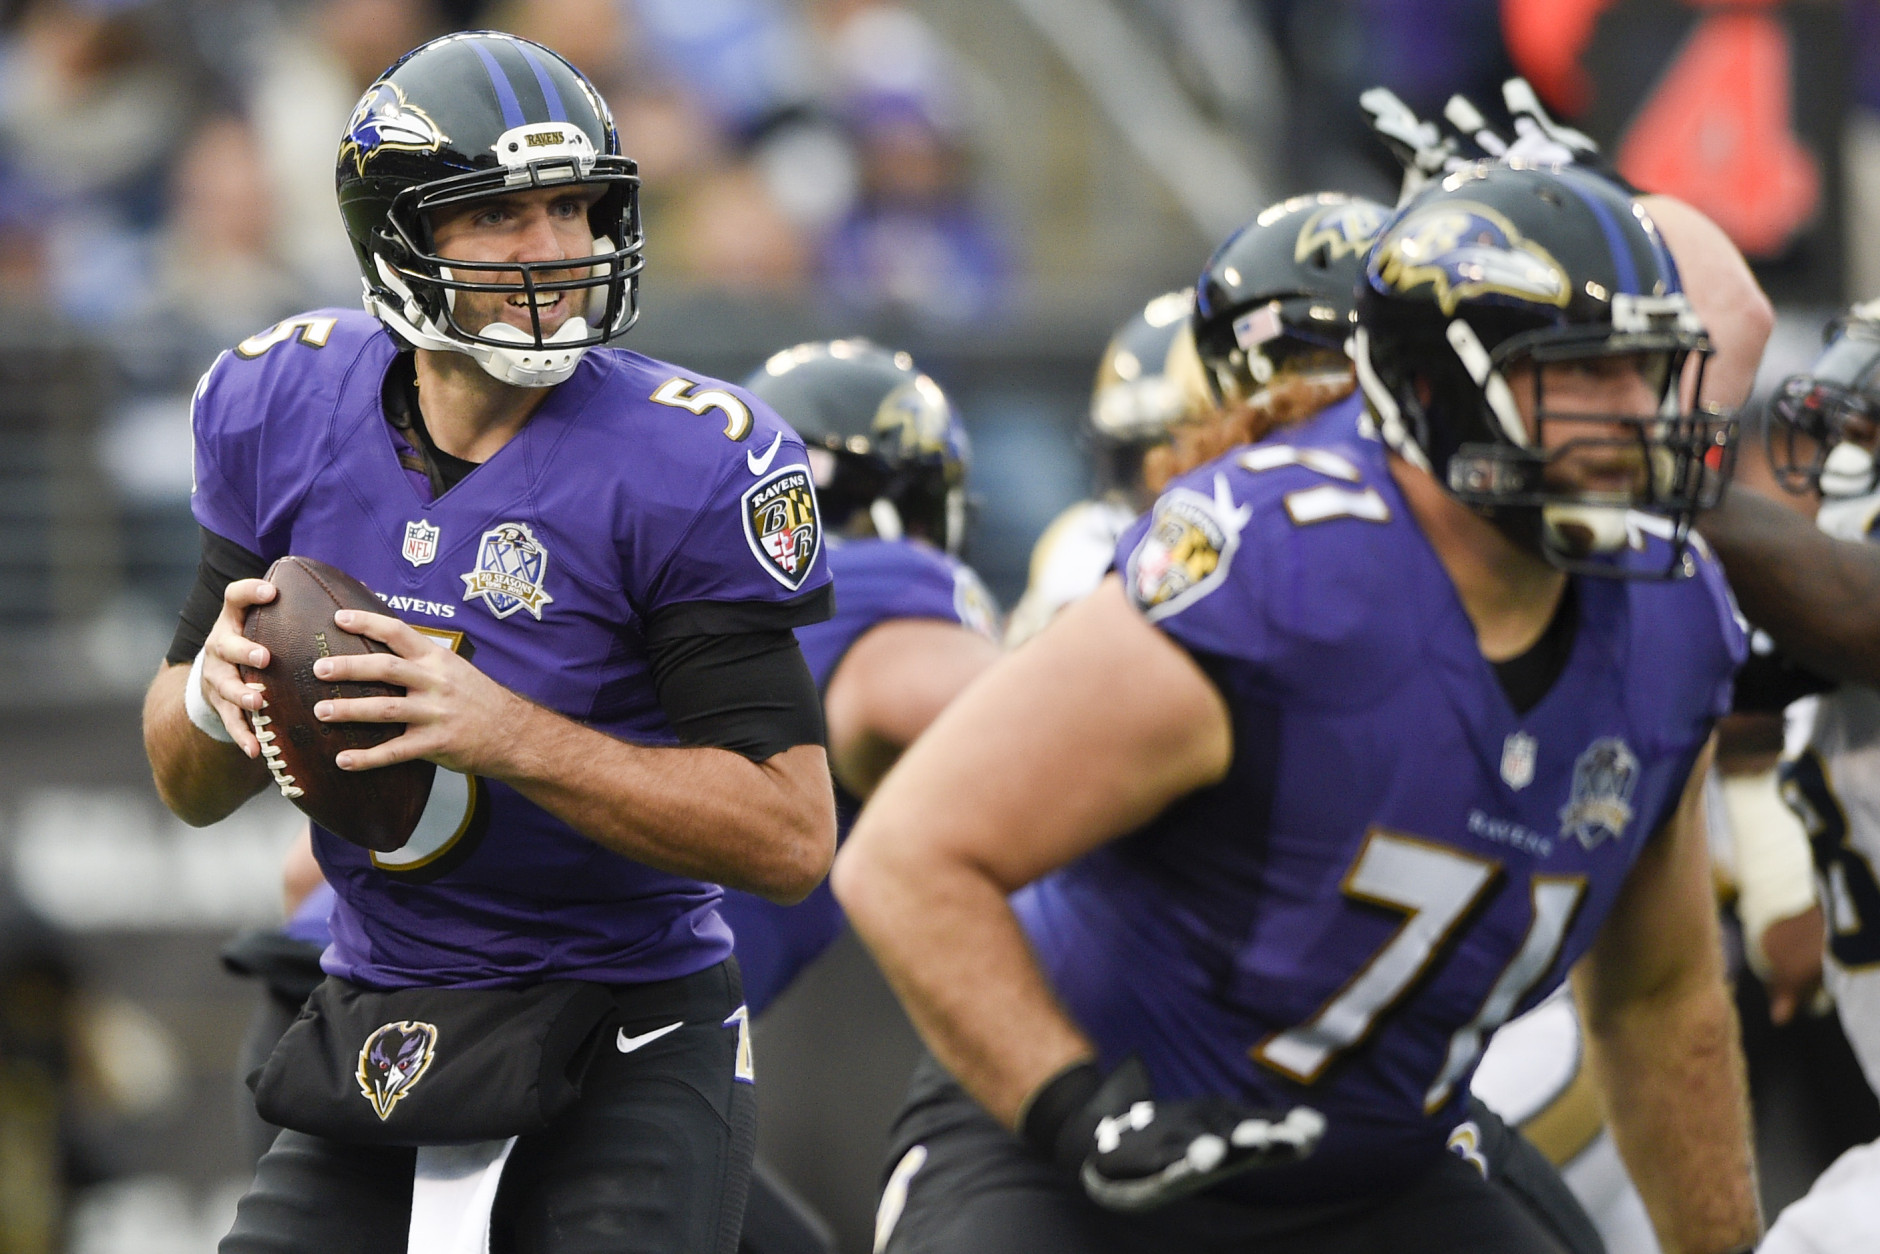 Baltimore Ravens quarterback Joe Flacco (5) turns out of the pocket looking for an open man during the second half of an NFL football game against the St. Louis Rams in Baltimore, Sunday, Nov. 22, 2015. Flacco was injured in the closing minutes of the Ravens 16-13 win over the St. Louis Rams. (AP Photo/Nick Wass)